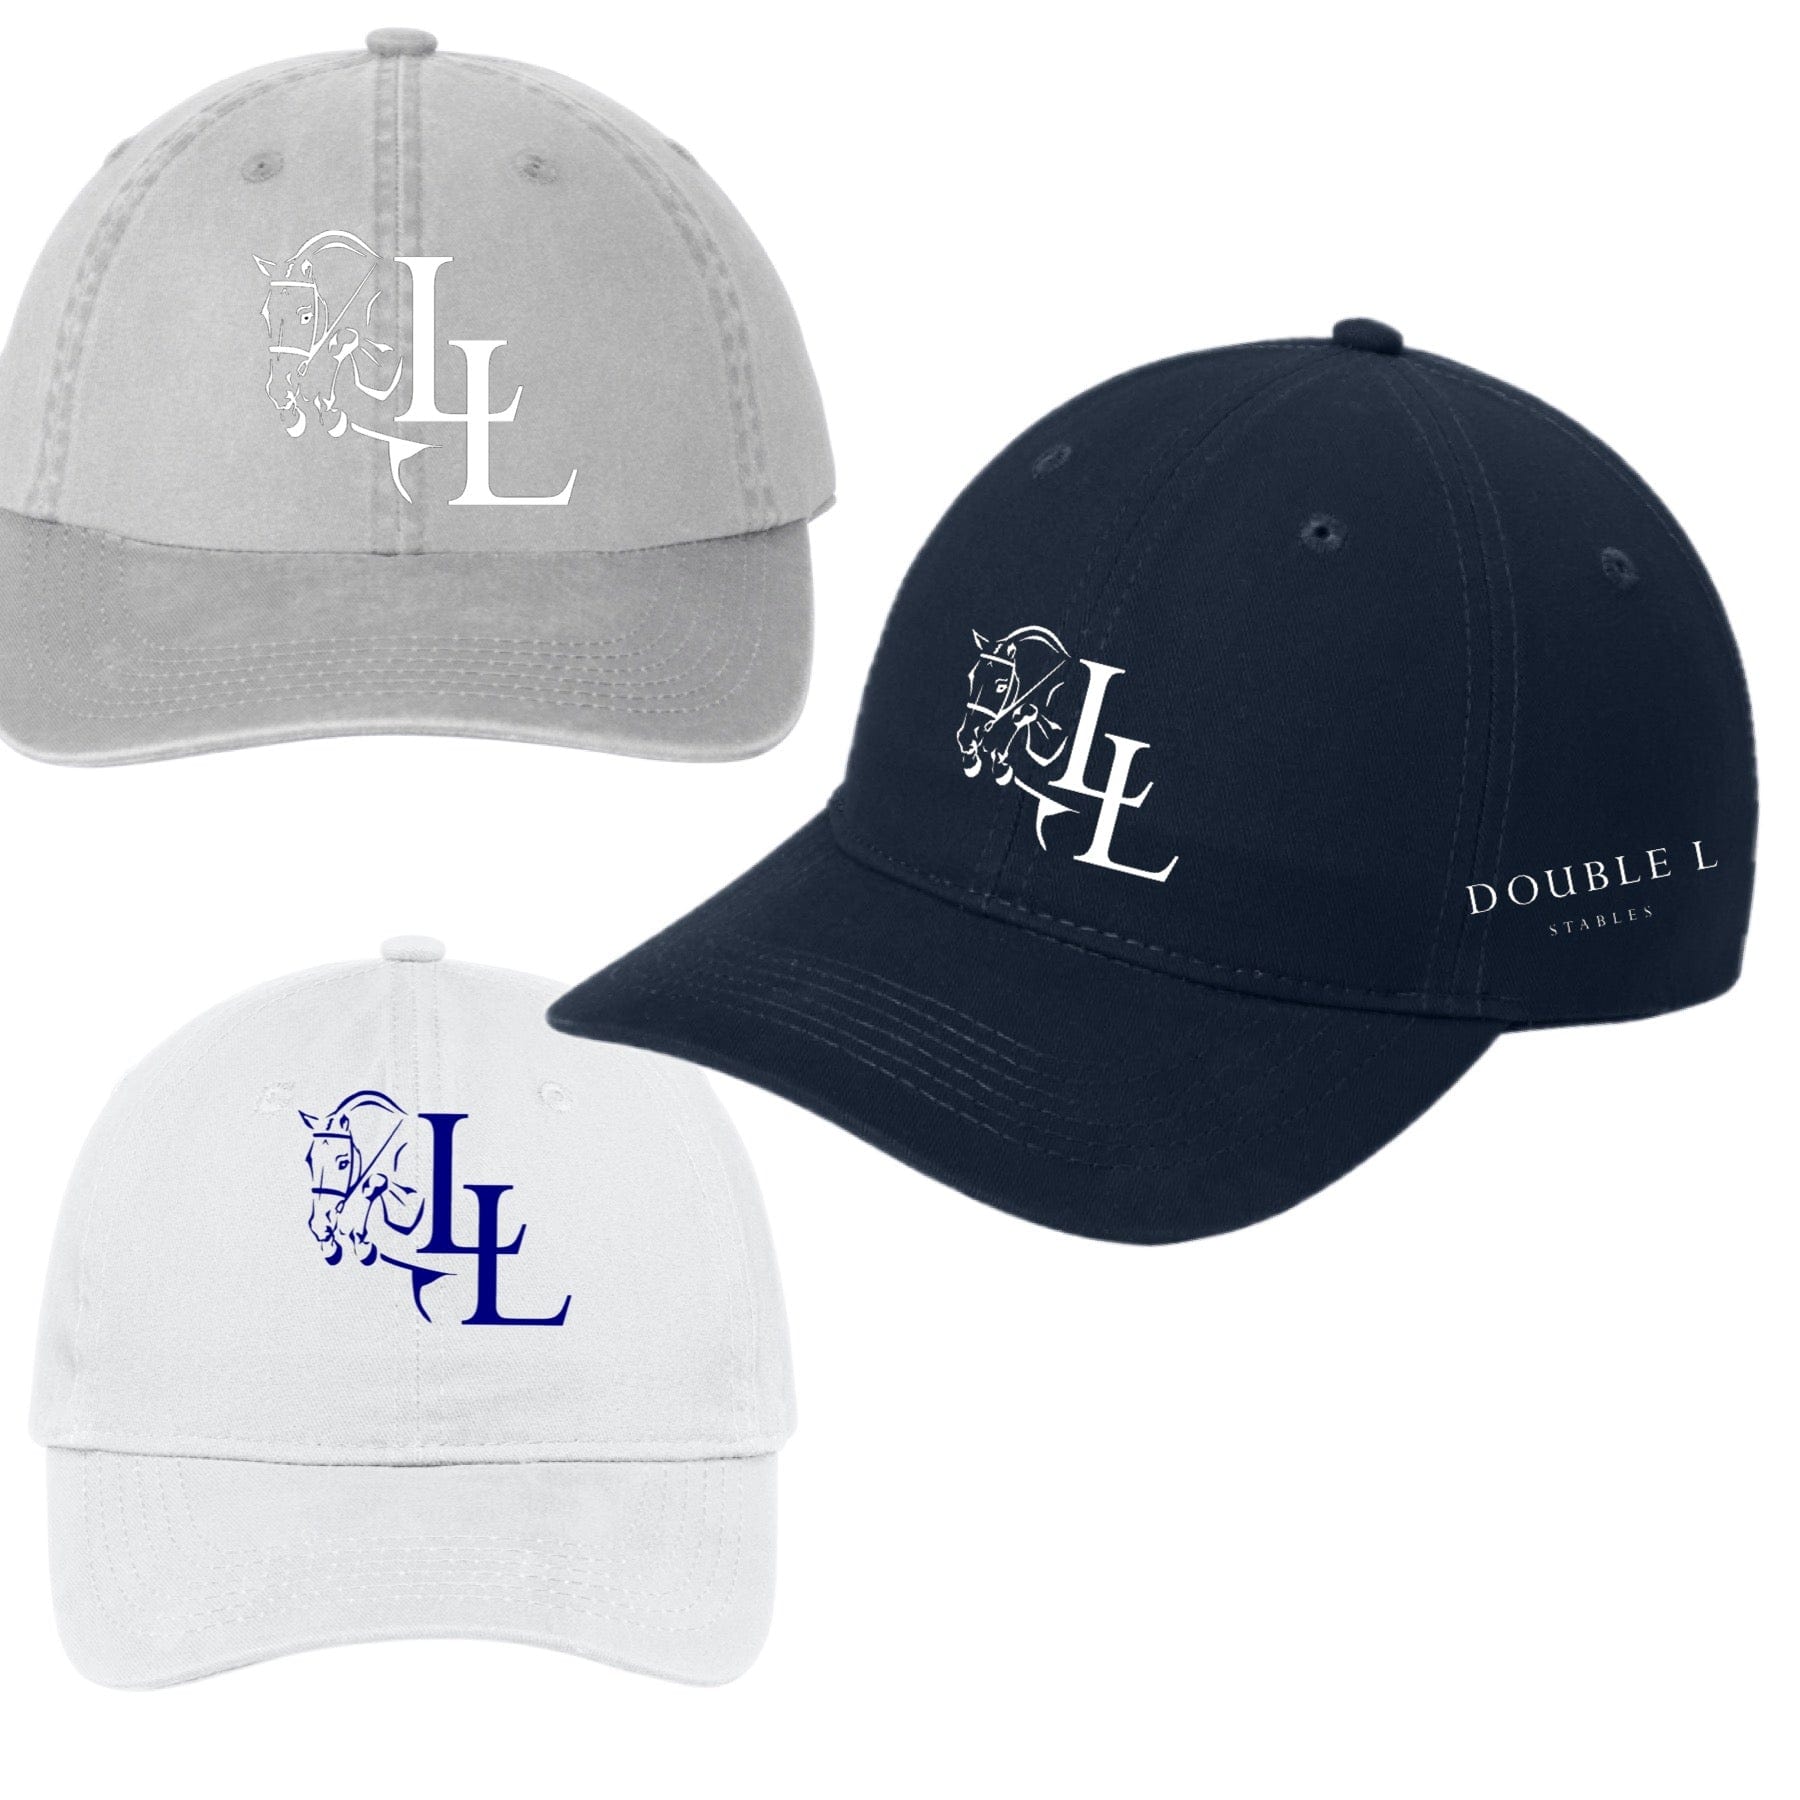 Equestrian Team Apparel Double L Stables Baseball Cap equestrian team apparel online tack store mobile tack store custom farm apparel custom show stable clothing equestrian lifestyle horse show clothing riding clothes horses equestrian tack store